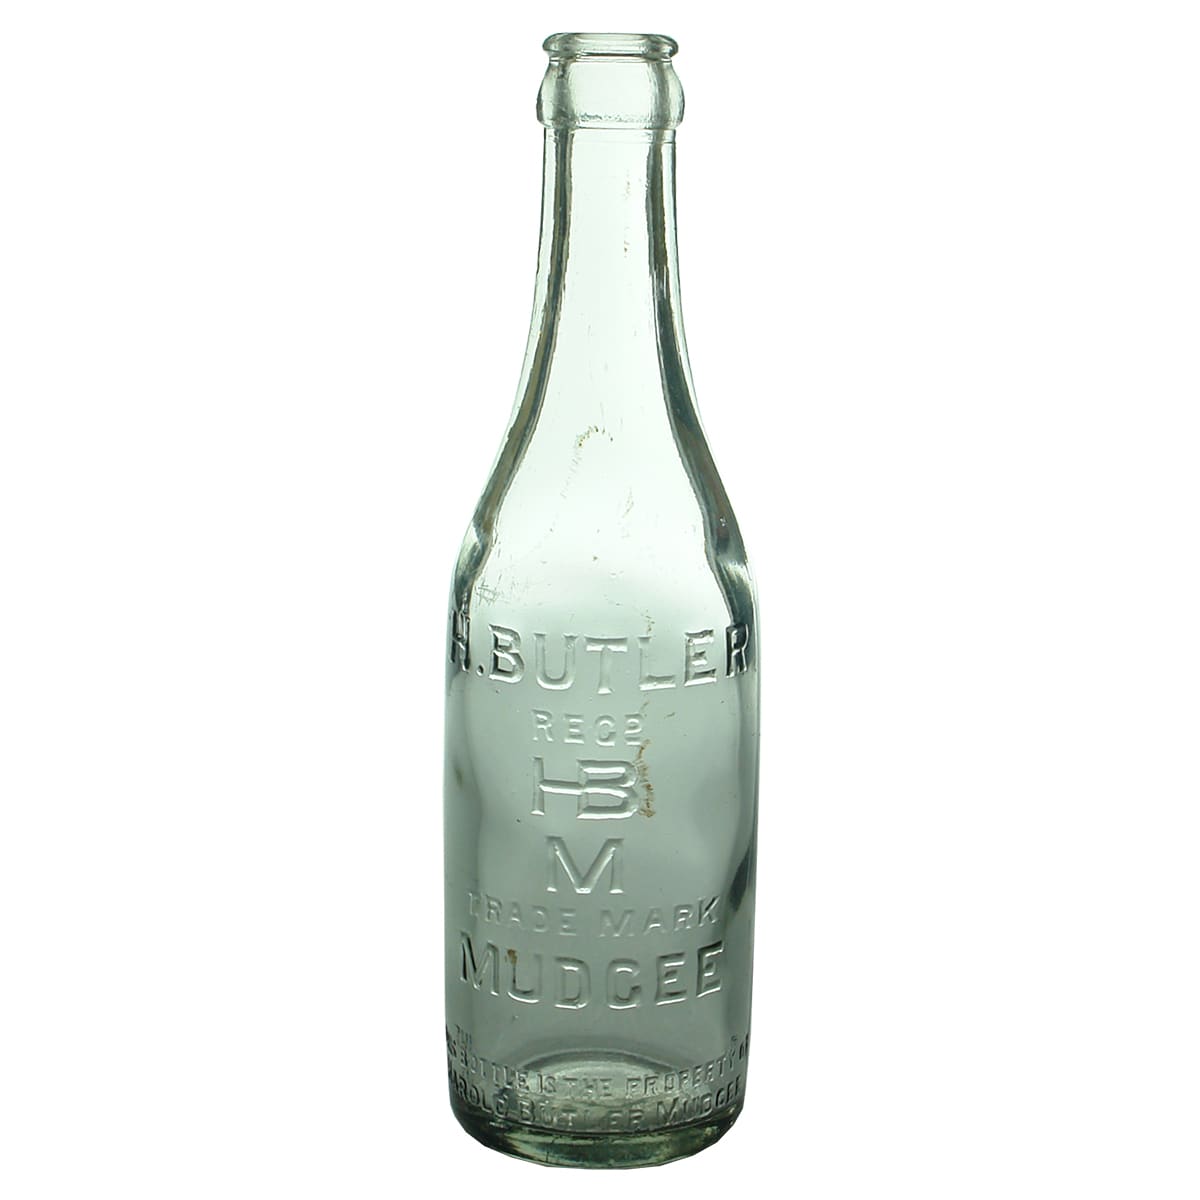 Crown Seal. H. Butler, Mudgee. Champagne. Grey Aqua. 10 oz. (New South Wales)